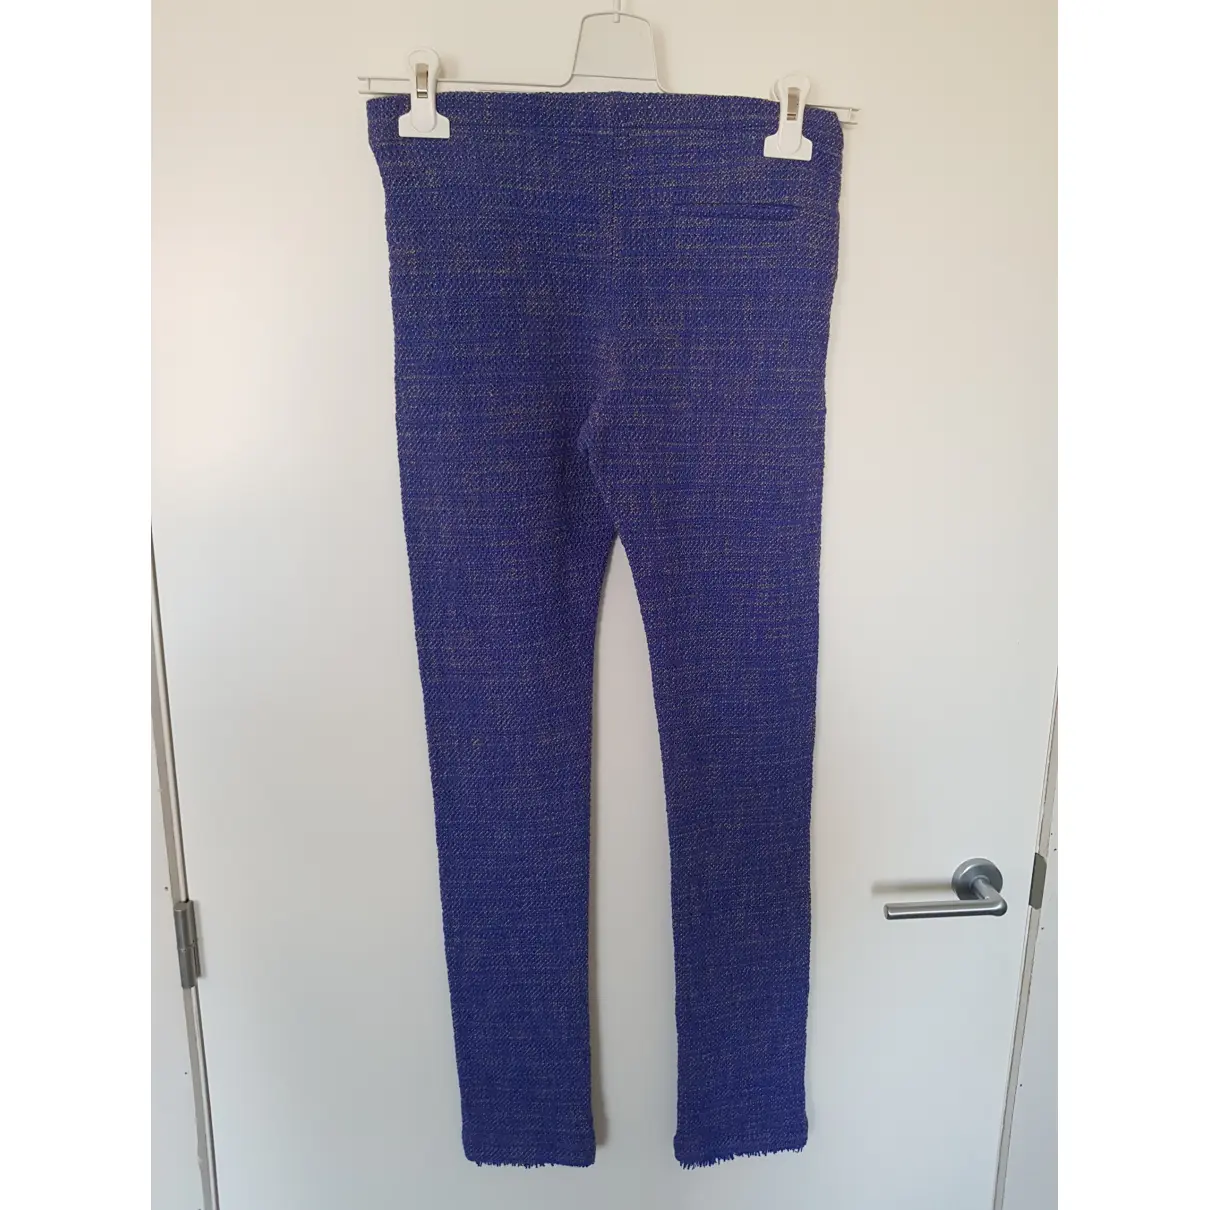 Buy Humanoid Blue Cotton Trousers online